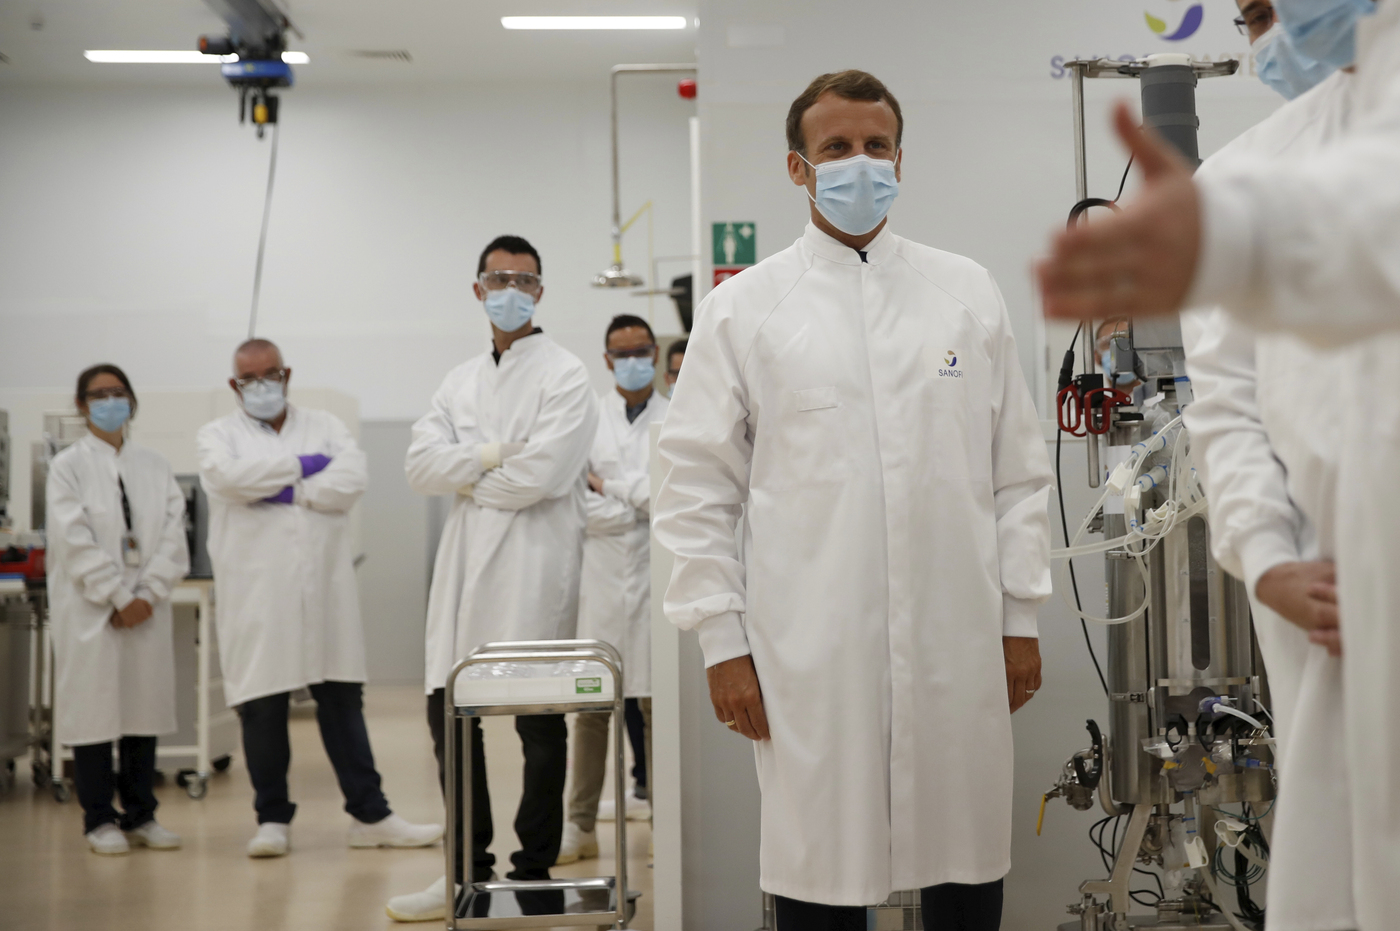 French President Emmanuel Macron talks with researchers as he visits an industrial development laboratory at the French drugmaker's vaccine unit Sanofi Pasteur plant in Marcy-l'Etoile, near Lyon, central France, Tuesday, June 16, 2020. The visit comes after rival pharmaceutical company AstraZeneca this weekend announced a deal to supply 400 million vaccine doses to EU countries, including France. (Gonzalo Fuentes/Pool via AP)